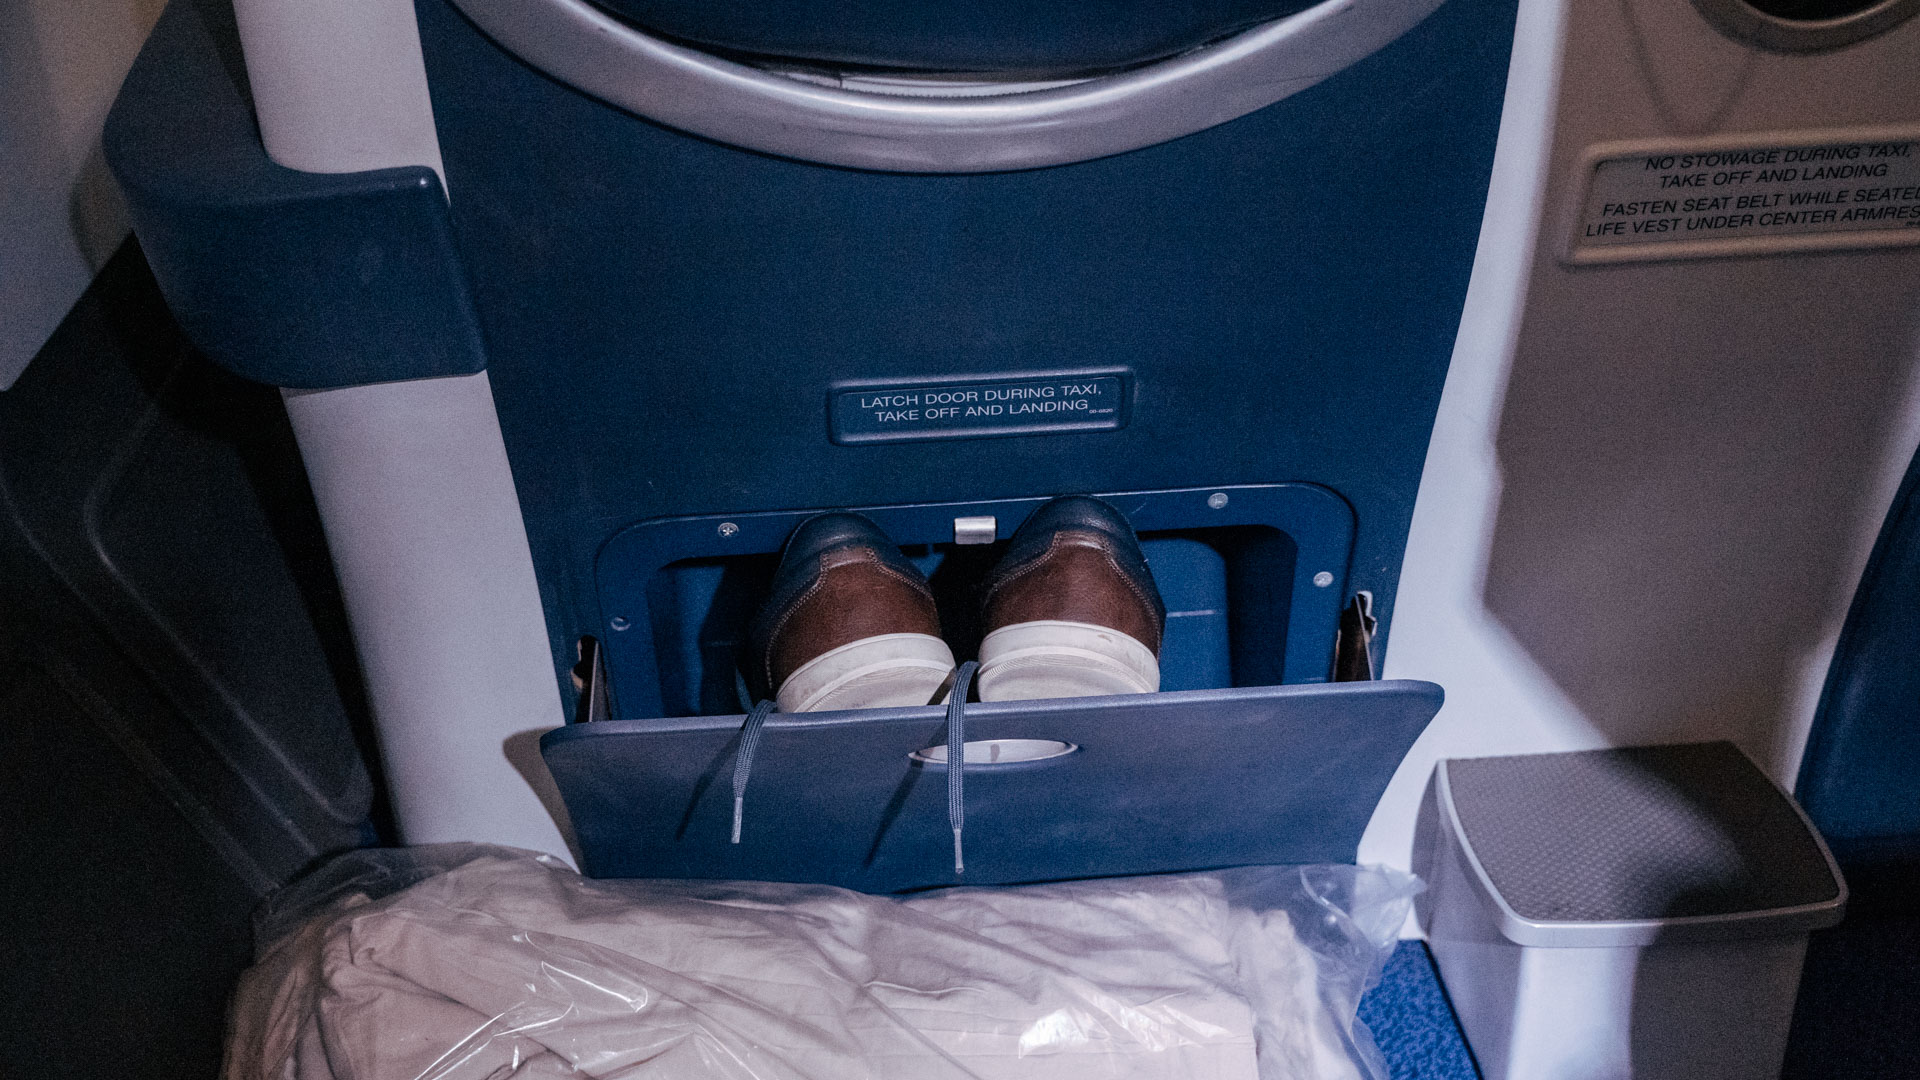 South African Airways A340 shoe compartment.